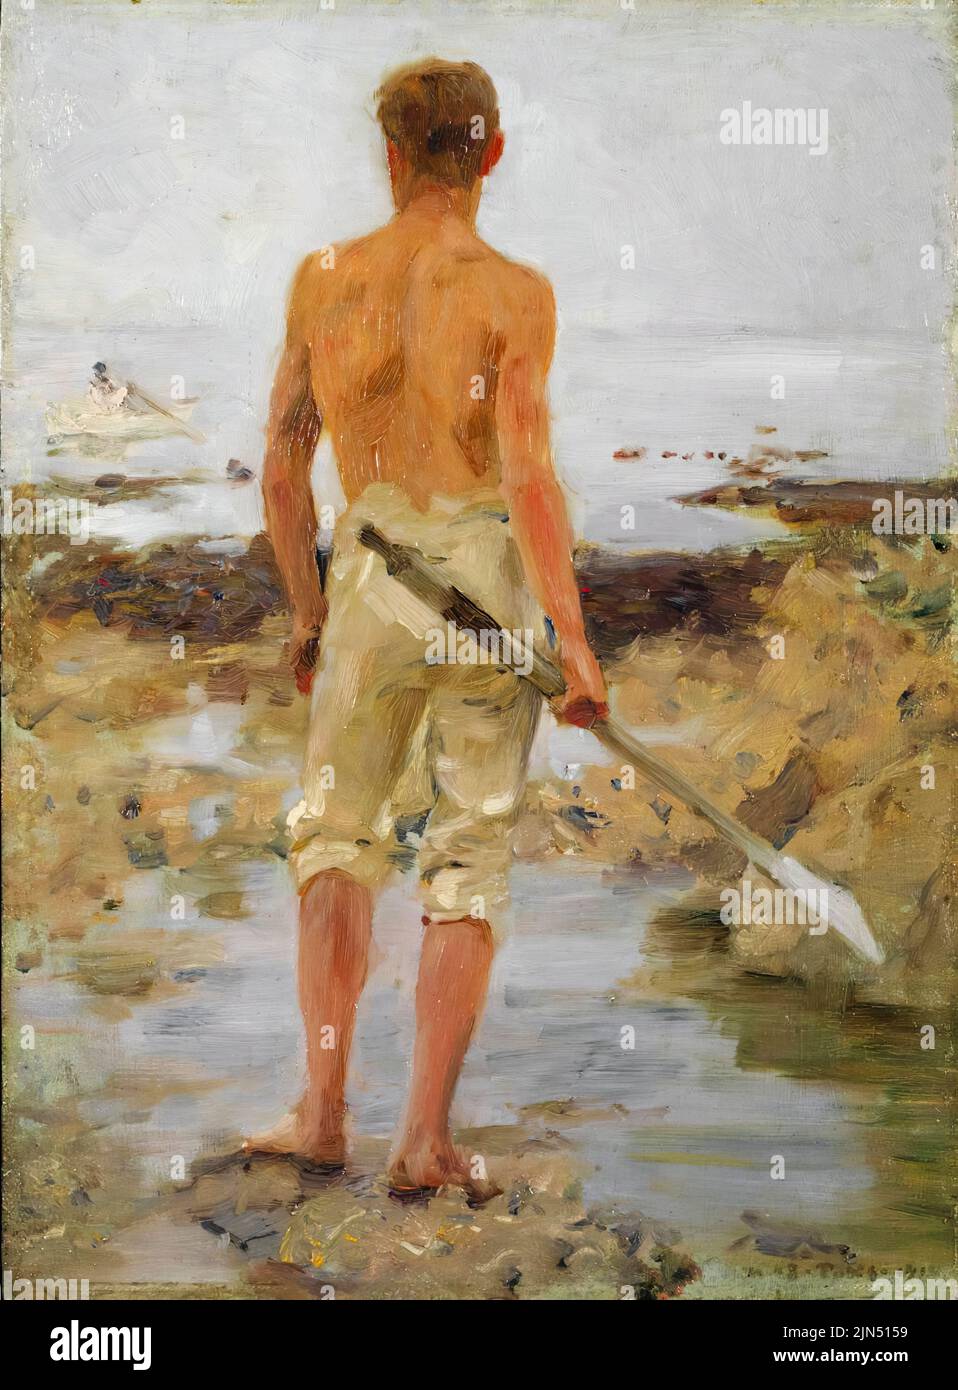 Henry Scott Tuke, A Boy with an Oar, painting in oil on panel, 1910 Private Collection Stock Photo